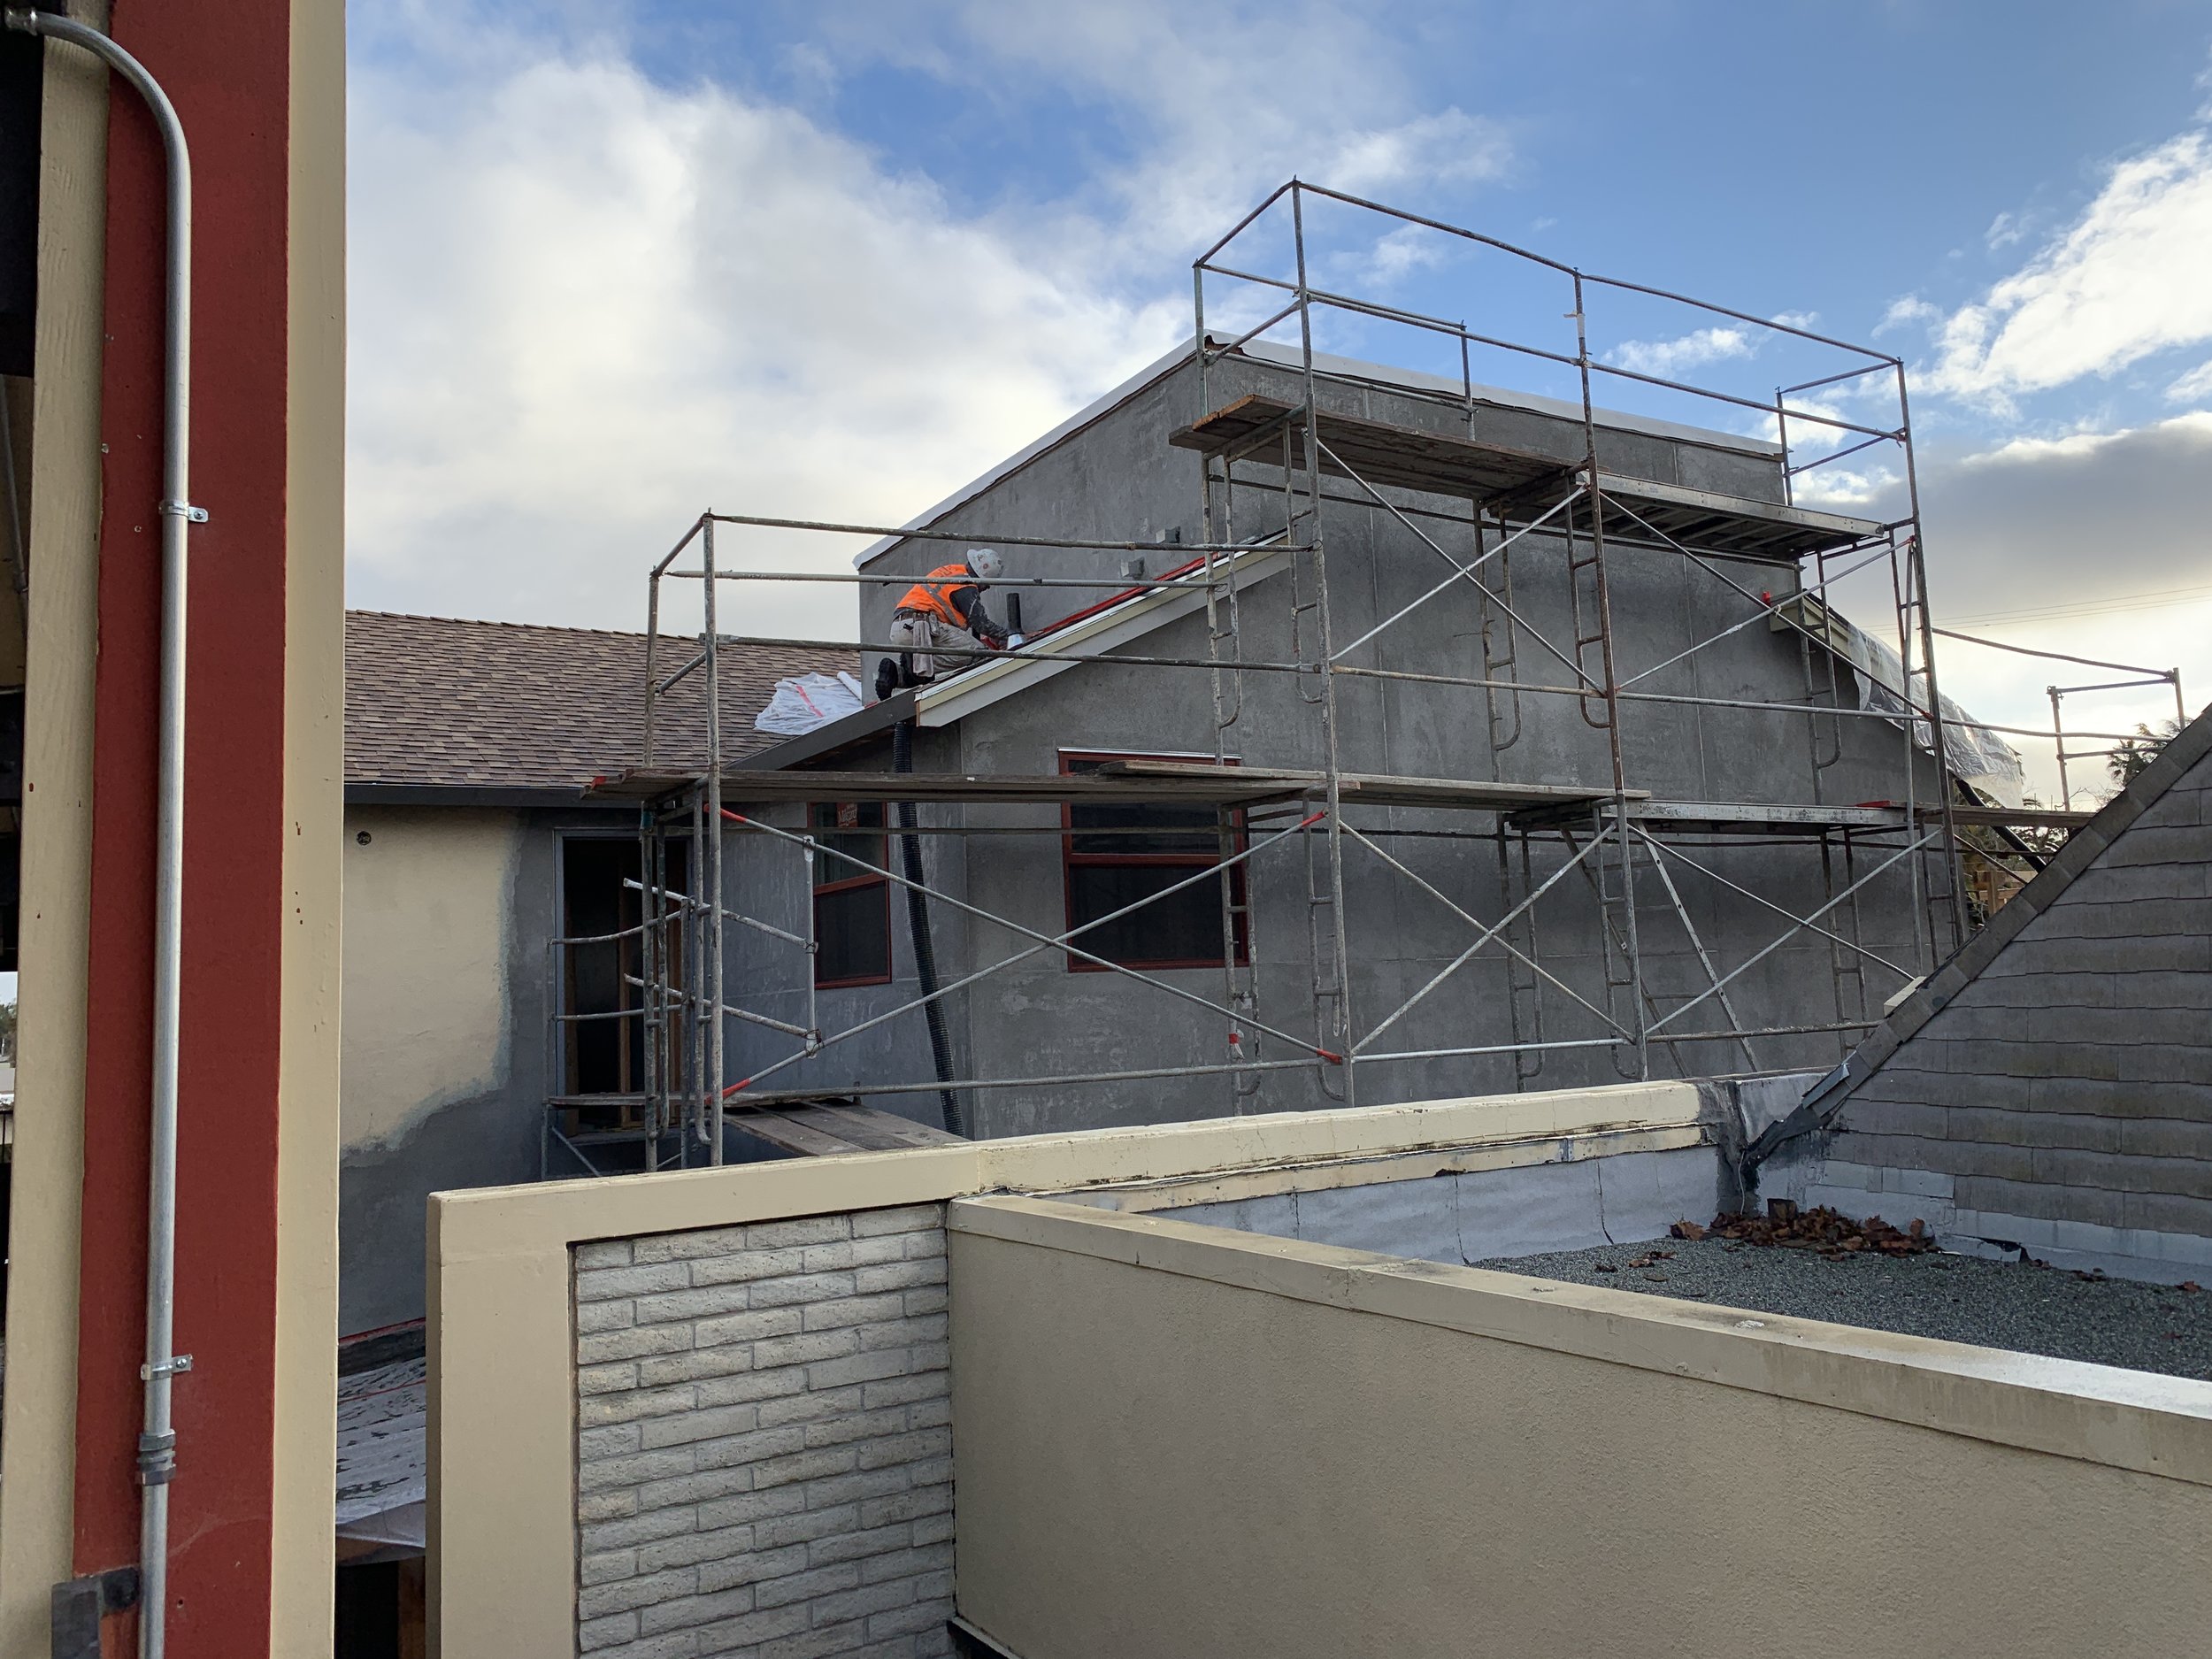 2-28-2019 Stucco on the second floor walls